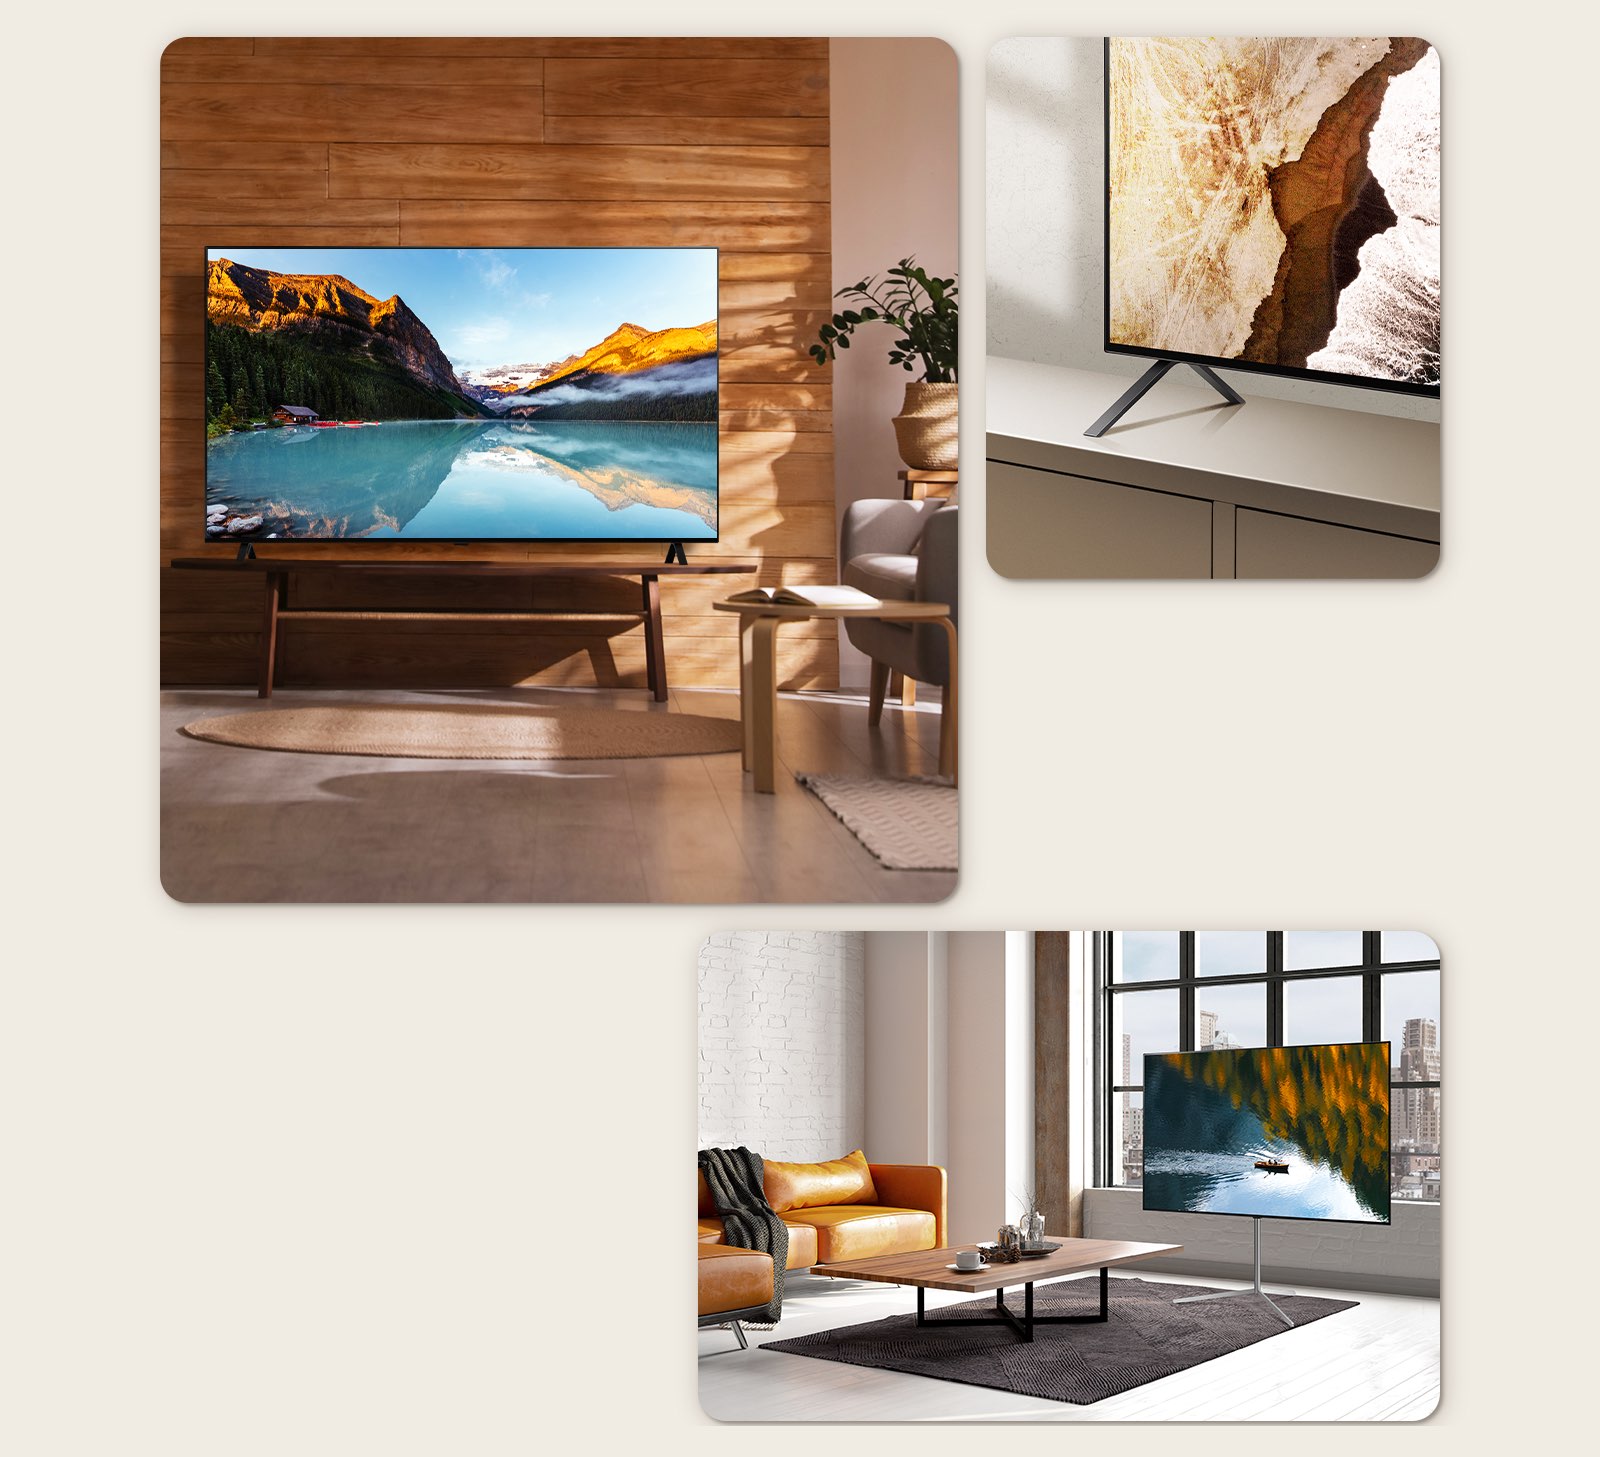 An image of LG OLED A3 on a TV stand in front of a wooden wall. The bottom corner of LG OLED A3's base stand. LG OLED A3 on a Floor Stand in front of a window overlooking the city.